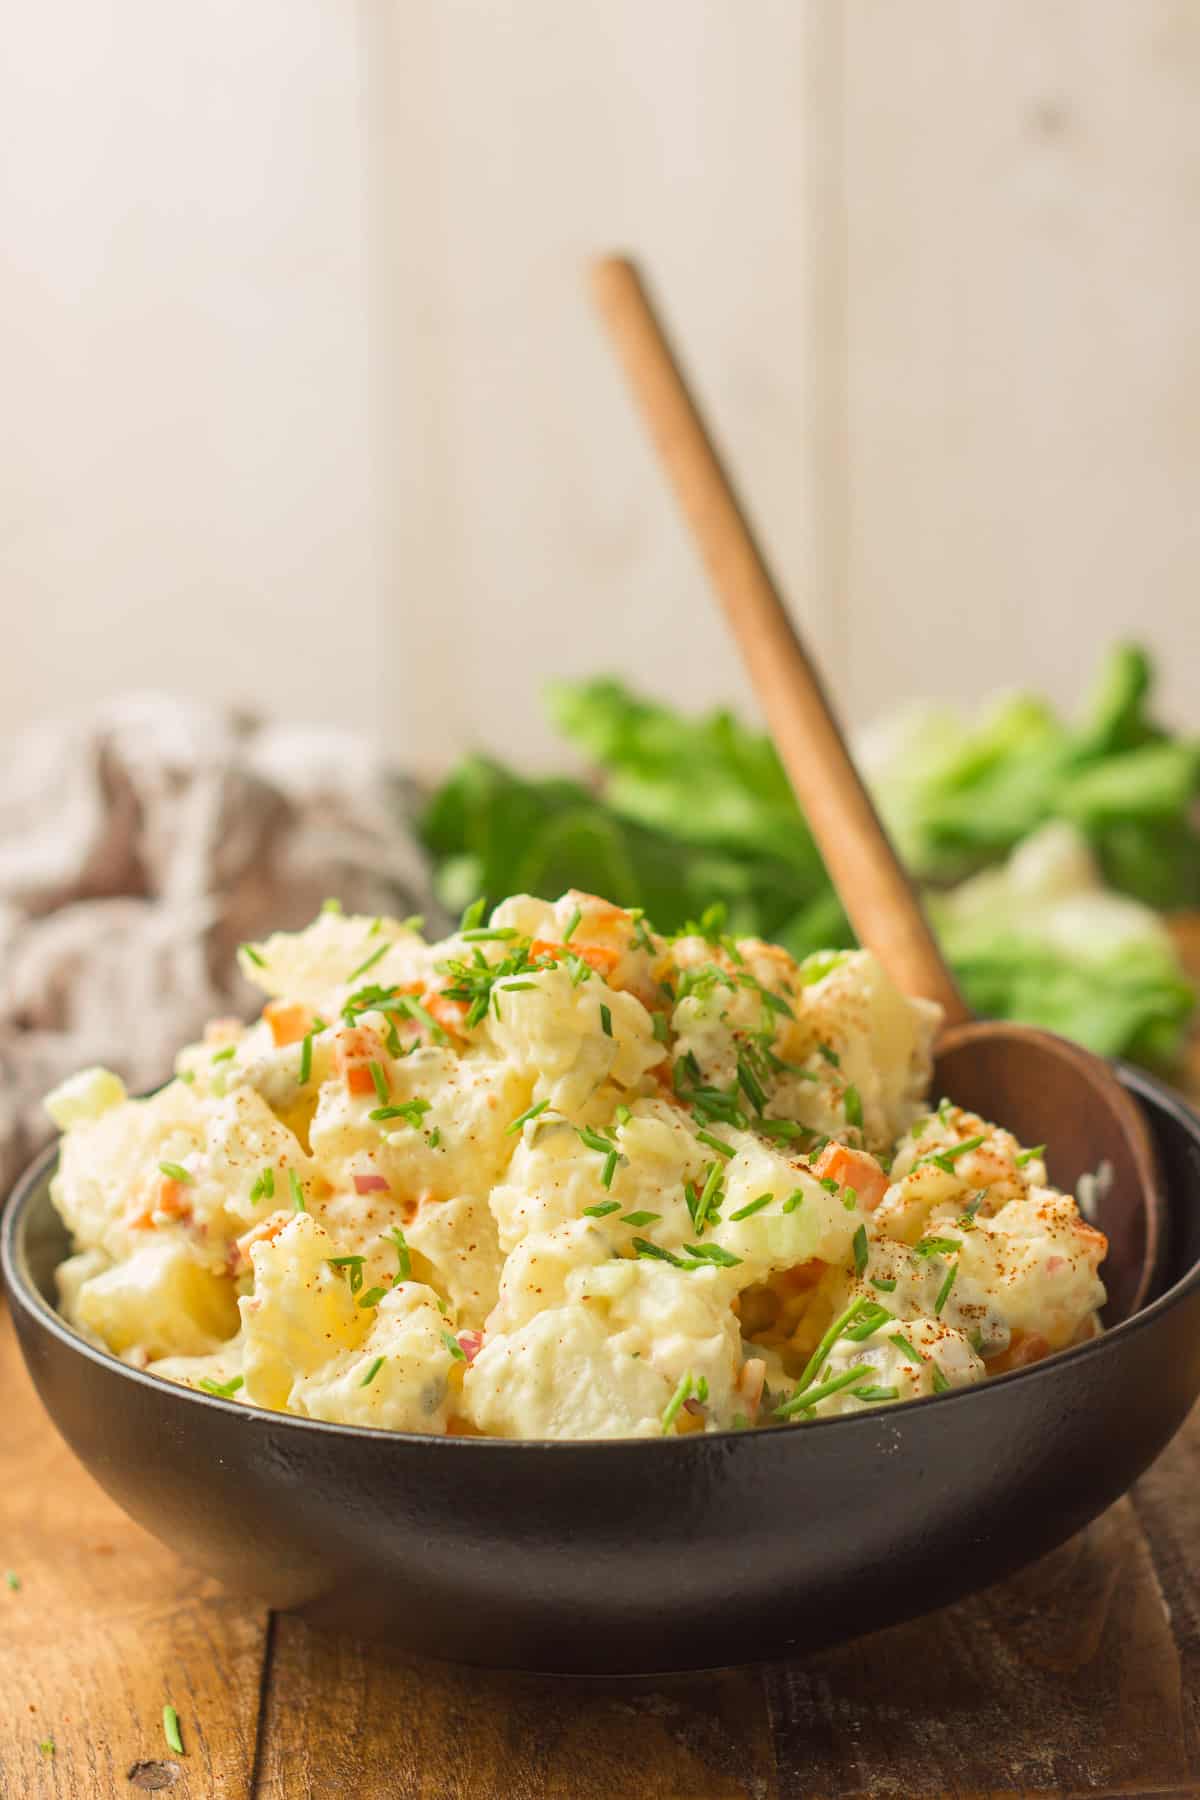 Bowl of Vegan Potato Salad with Wooden Spoon, with Napkin and Lettuce Leaves in the Background